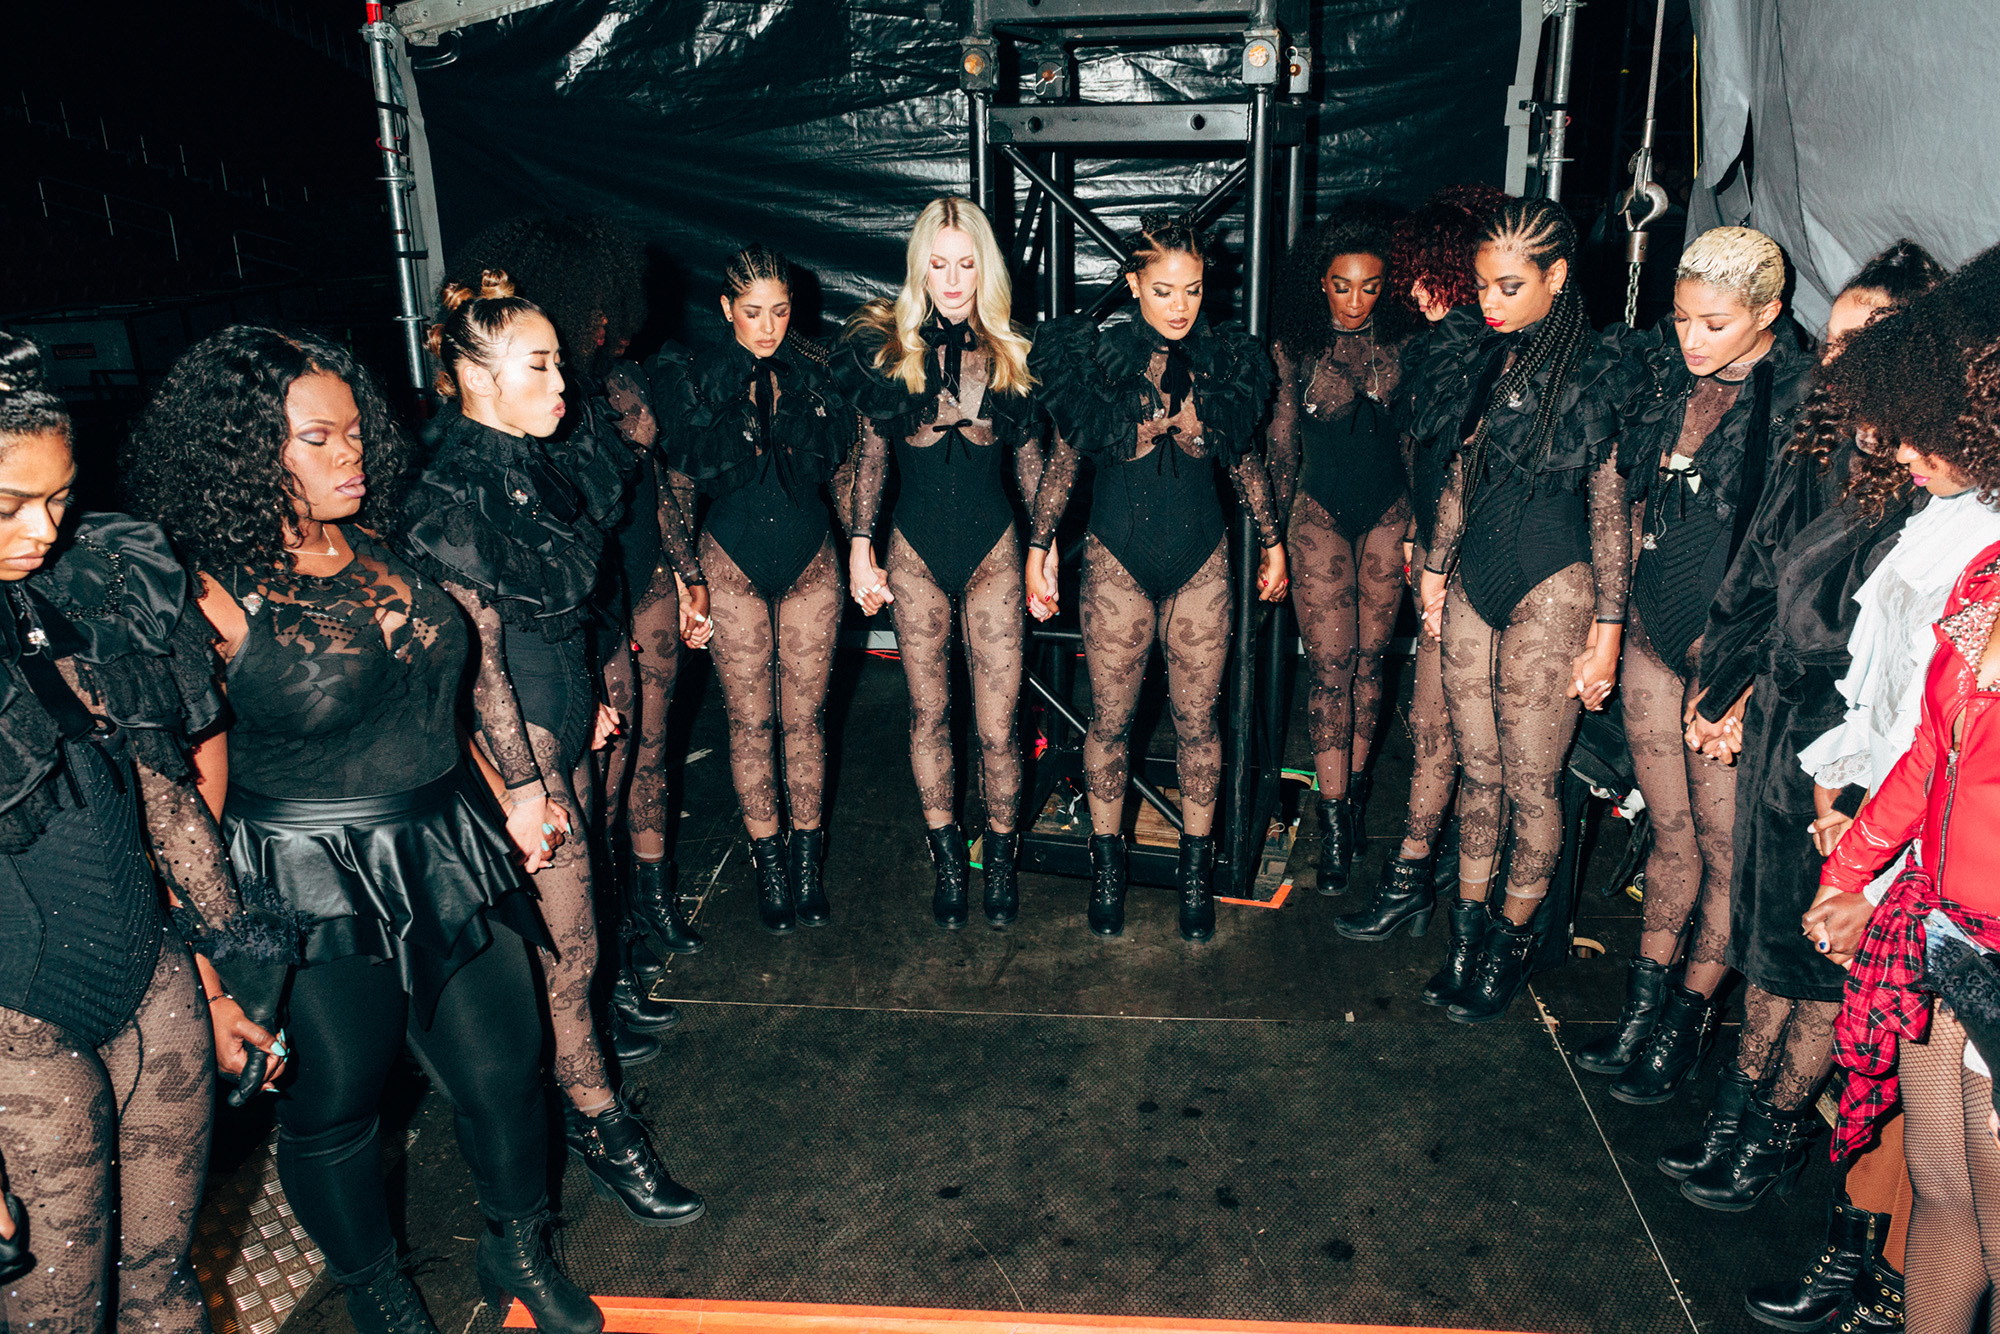 A moment of prayer backstage at Beyoncé's Formation World Tour in Santa Clara, Calif., on Sept. 17, 2016.